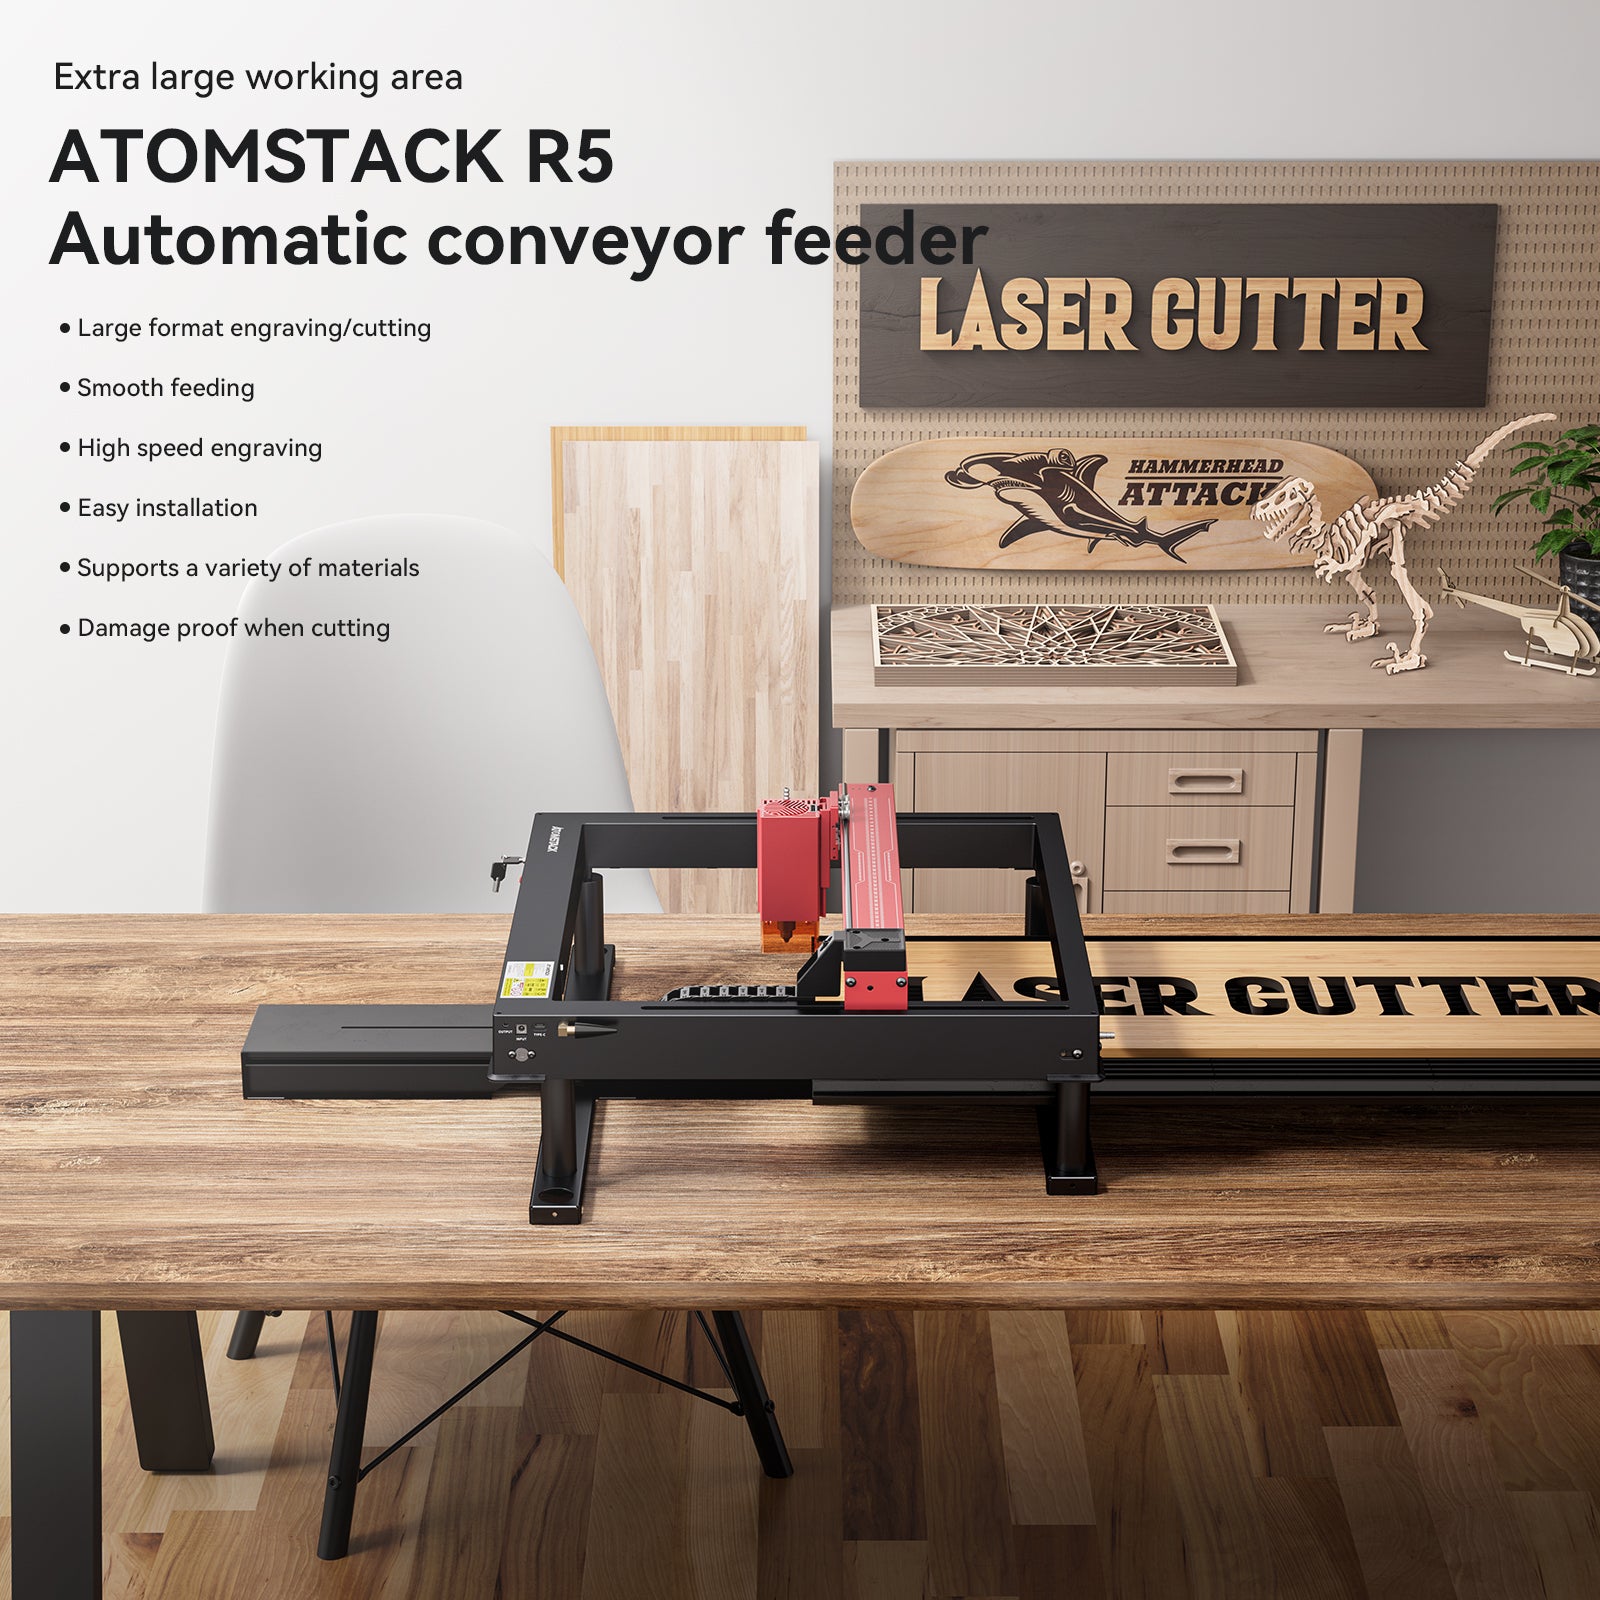 AtomStack R5 Automatic Conveyor Feeder For A6 PRO A12 PRO X12 PRO A24 PRO X24 PRO A70 MAX X40 A40 PRO X30 X20 S20 PRO X7 PRO A10 S10 PRO Laser Engraving Cutting Machine